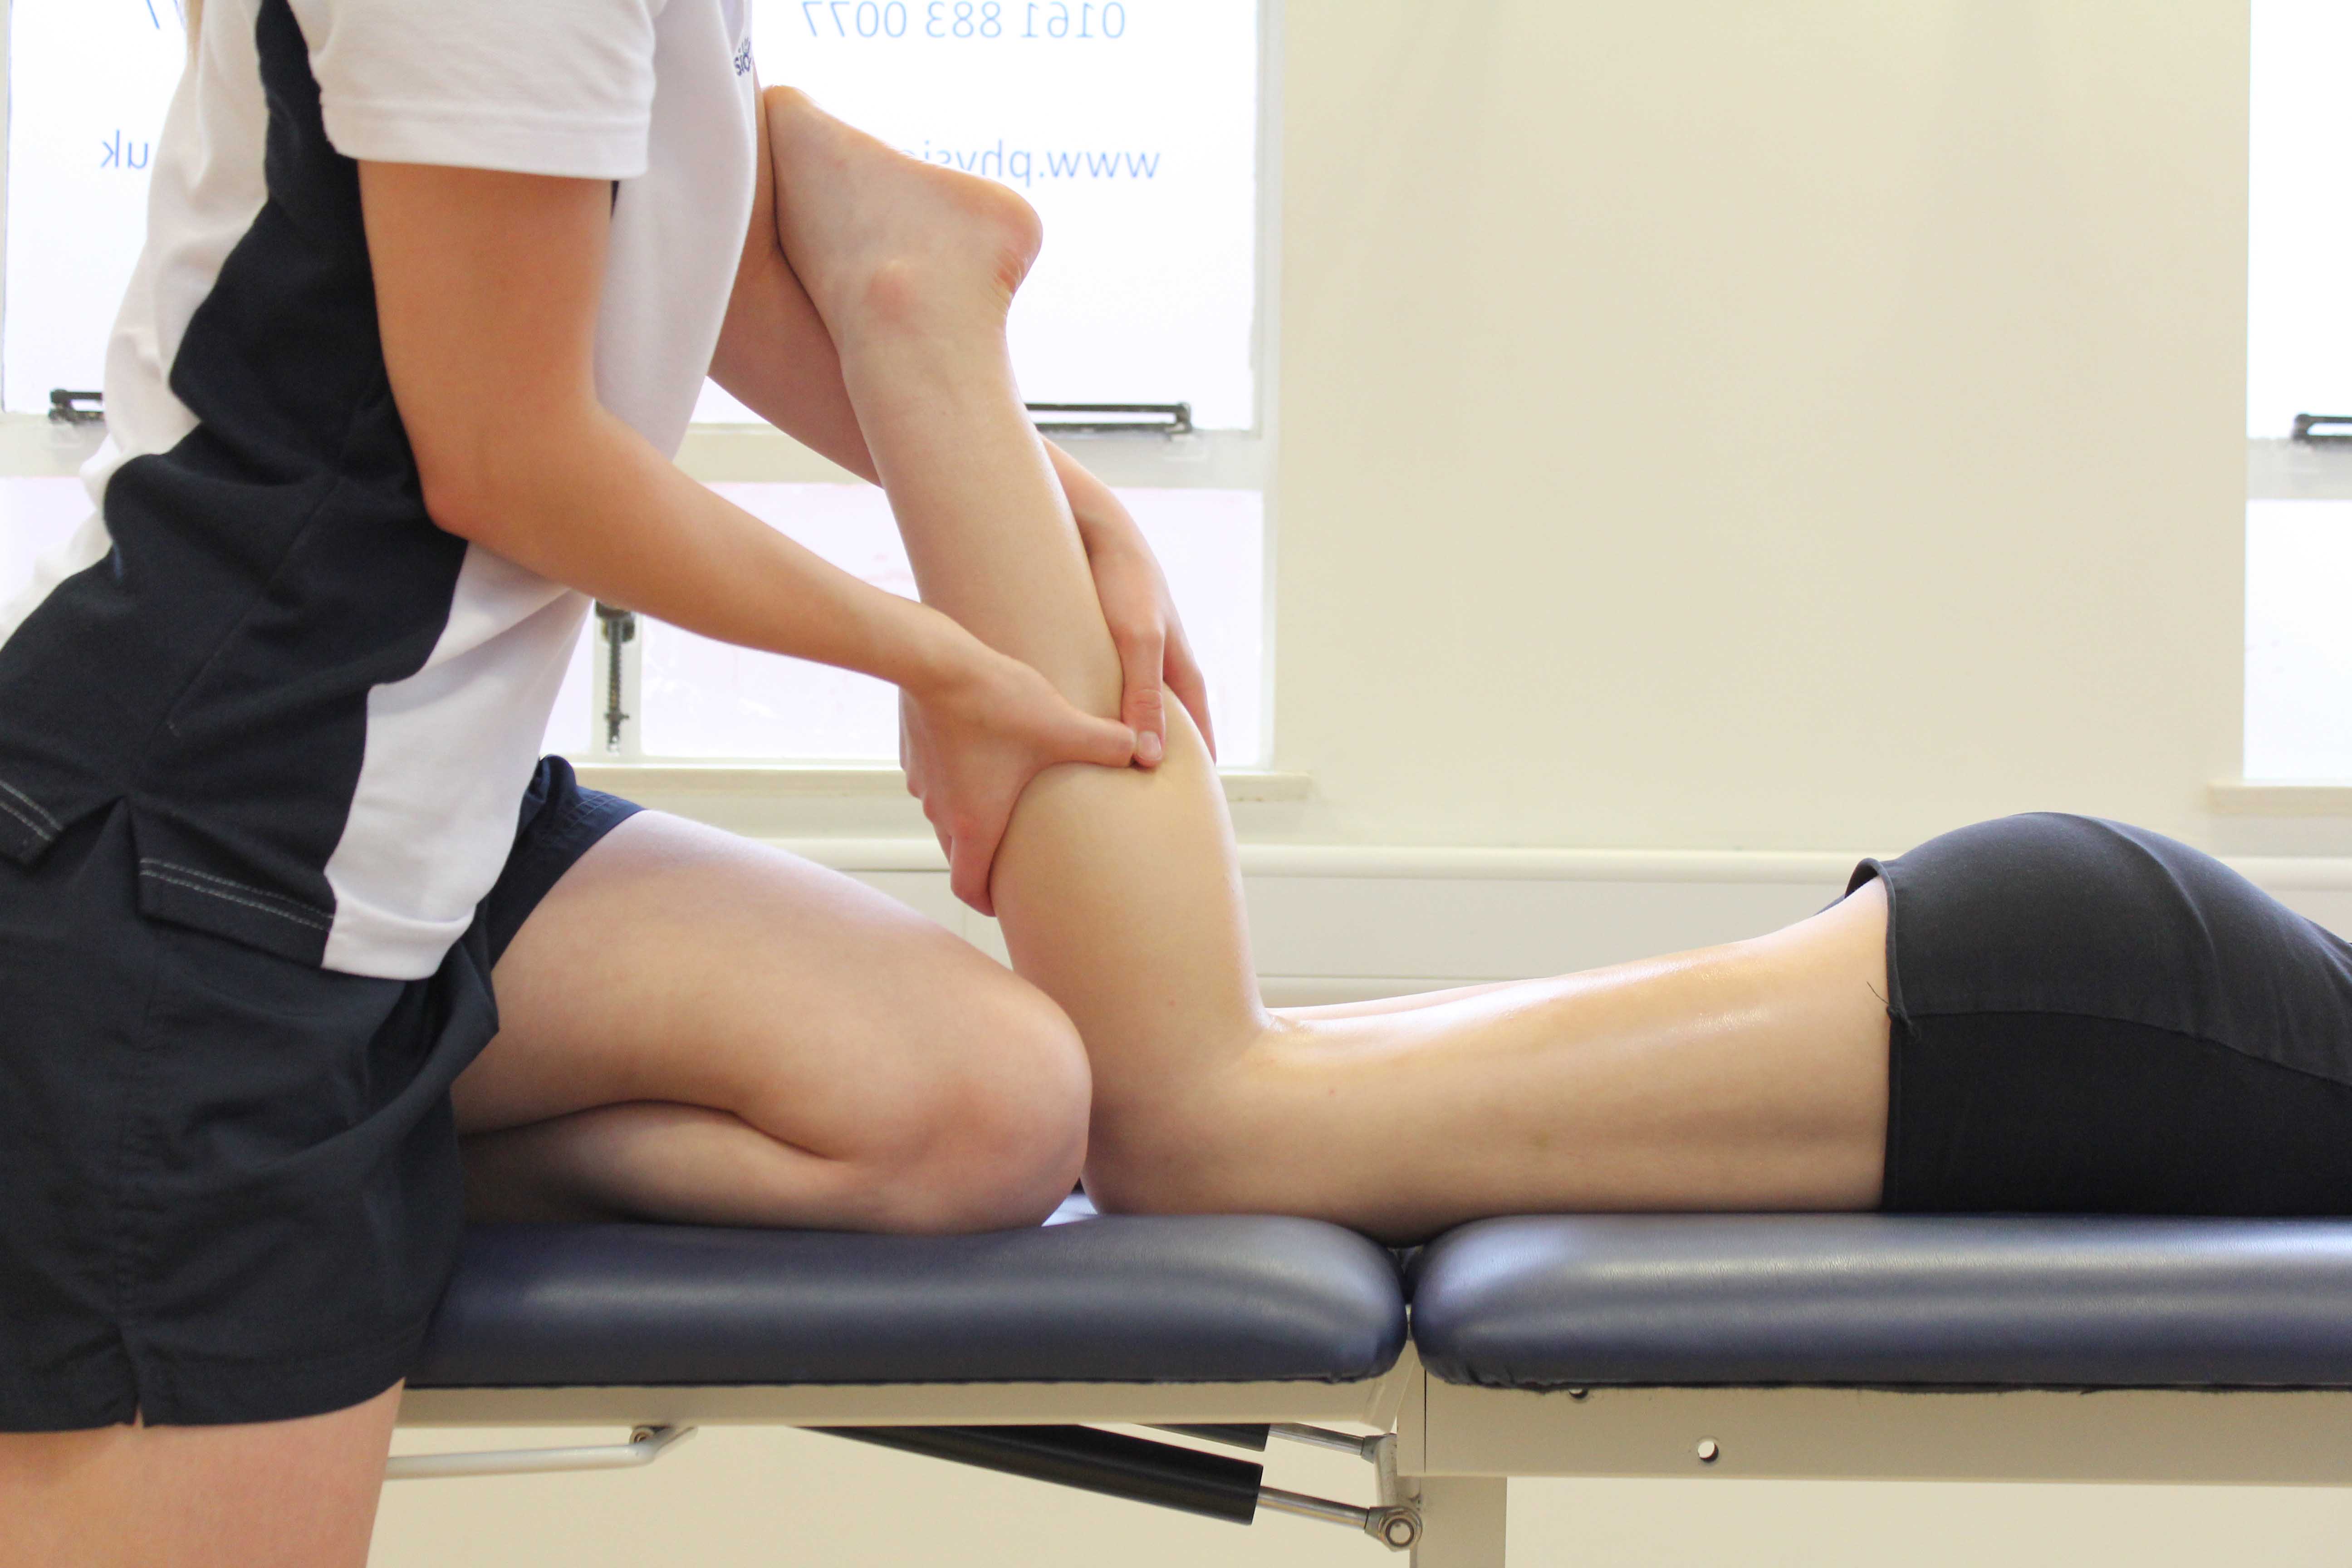 Calf Strain - Lower Leg - Conditions - Musculoskeletal - What We